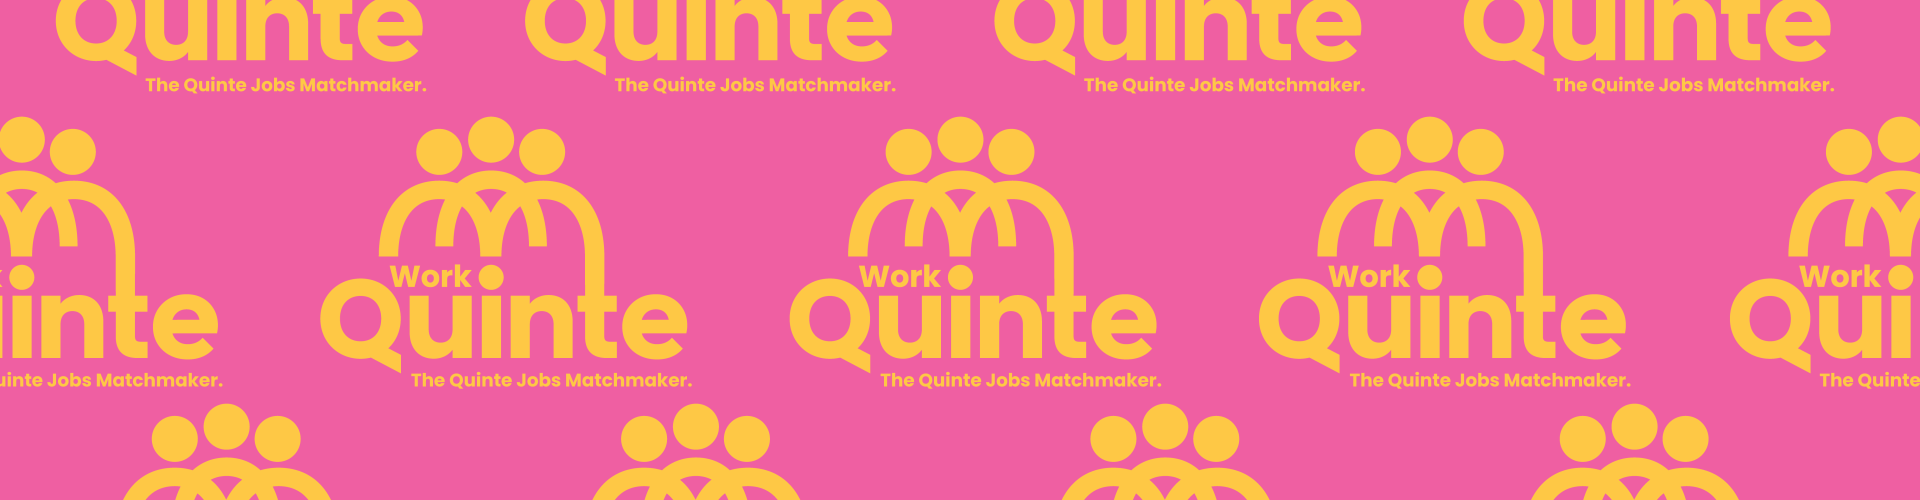 Pink background with orange Work in Quinte logo and The Quinte Jobs Matchmaker tagline.